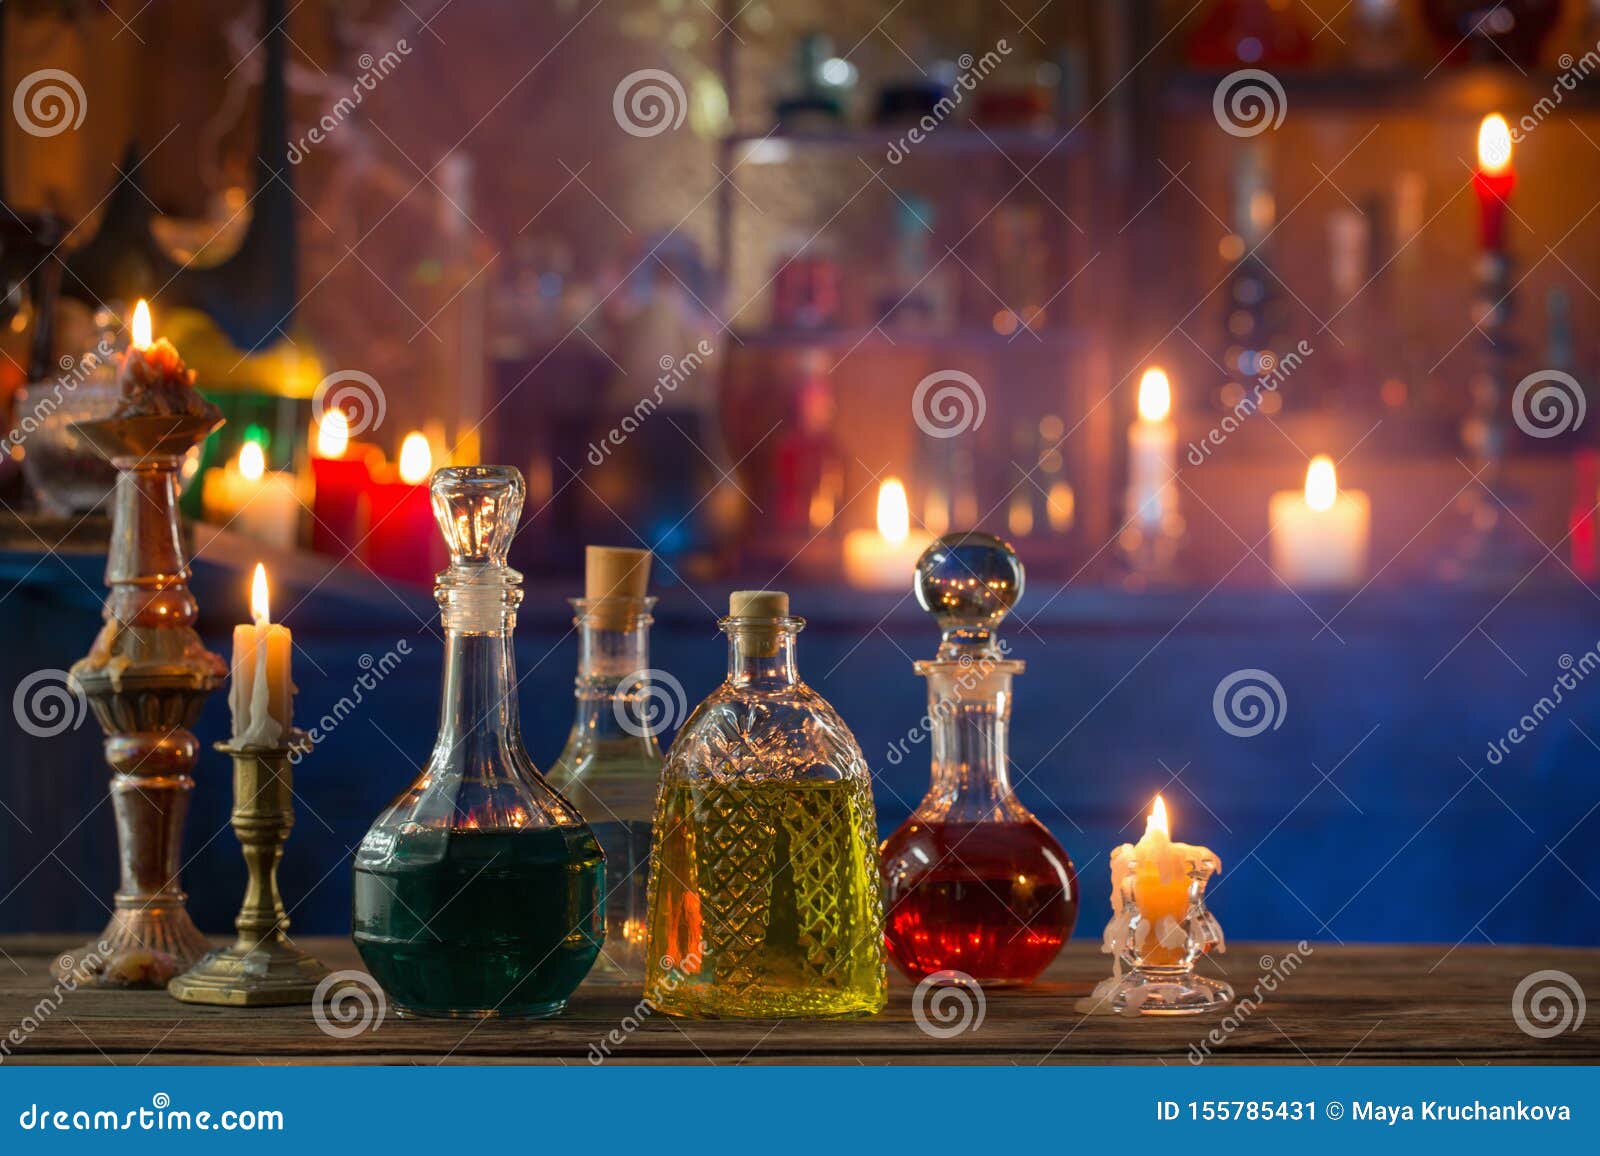 Magic Potions in Bottles on Wooden Background Stock Image - Image of